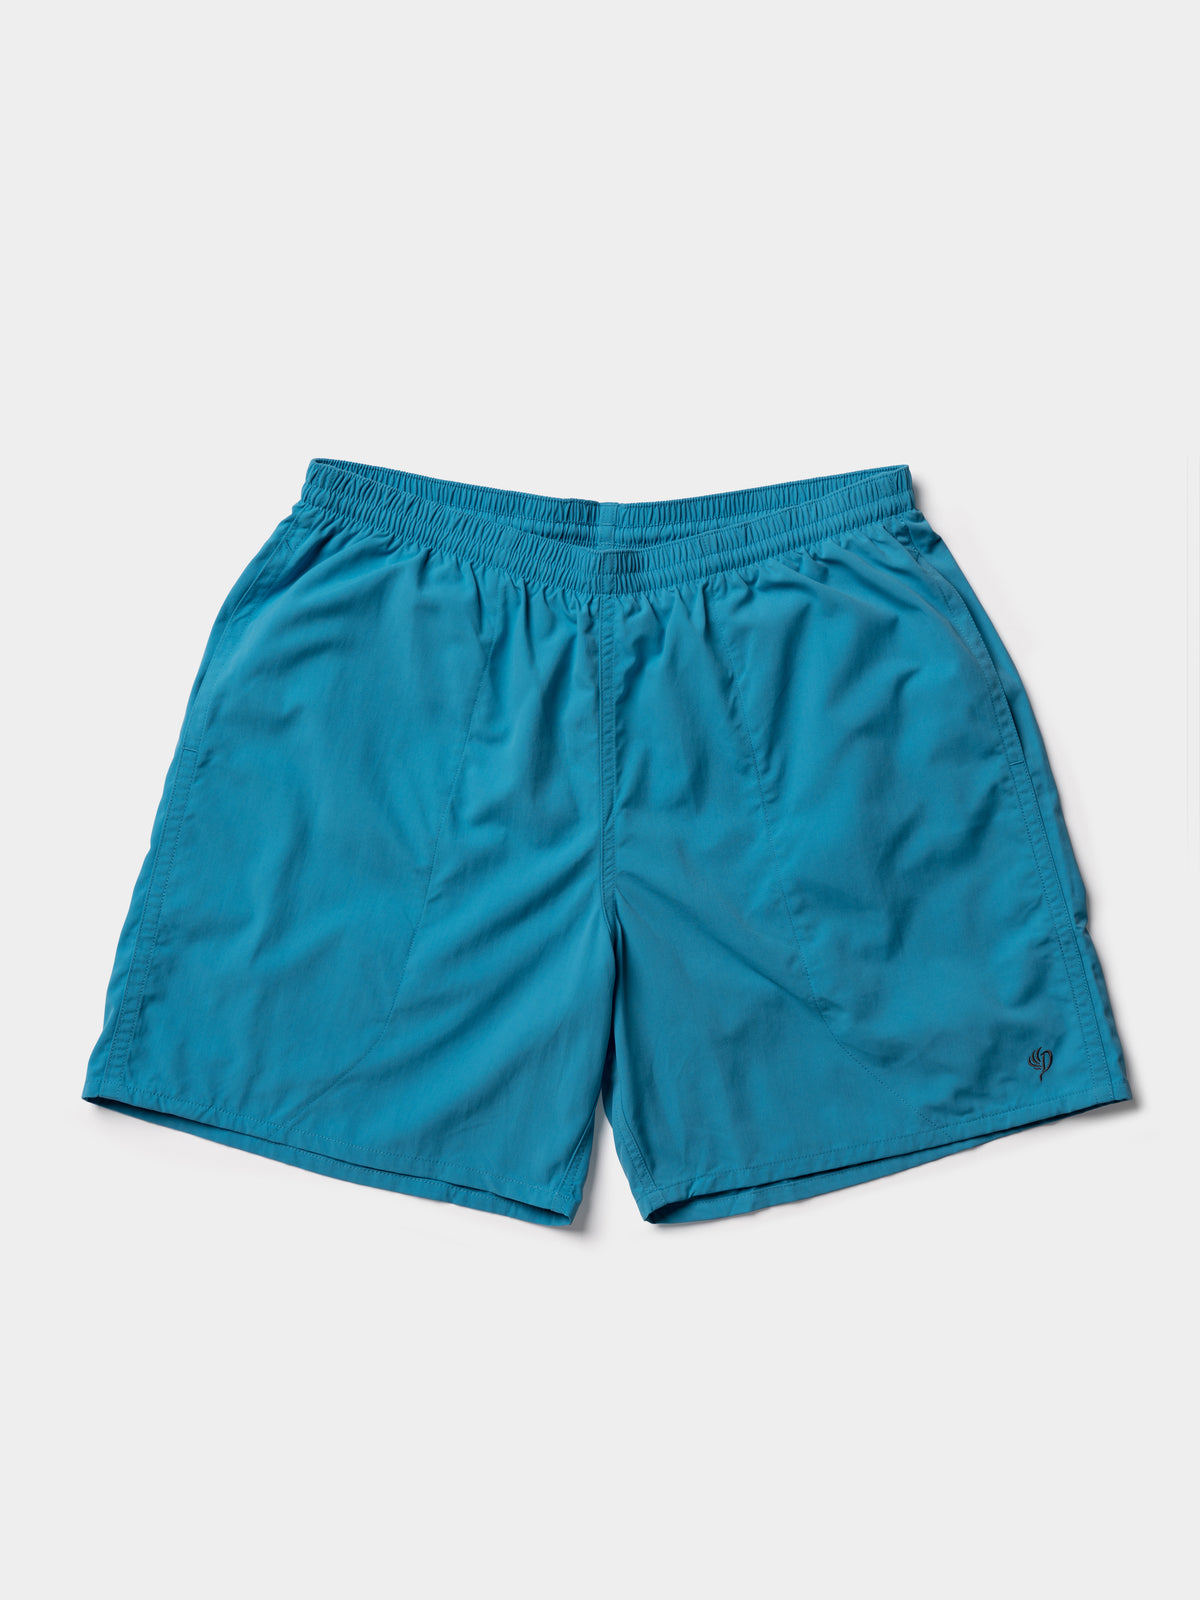 Scout Shorts 7" - Charter Blue